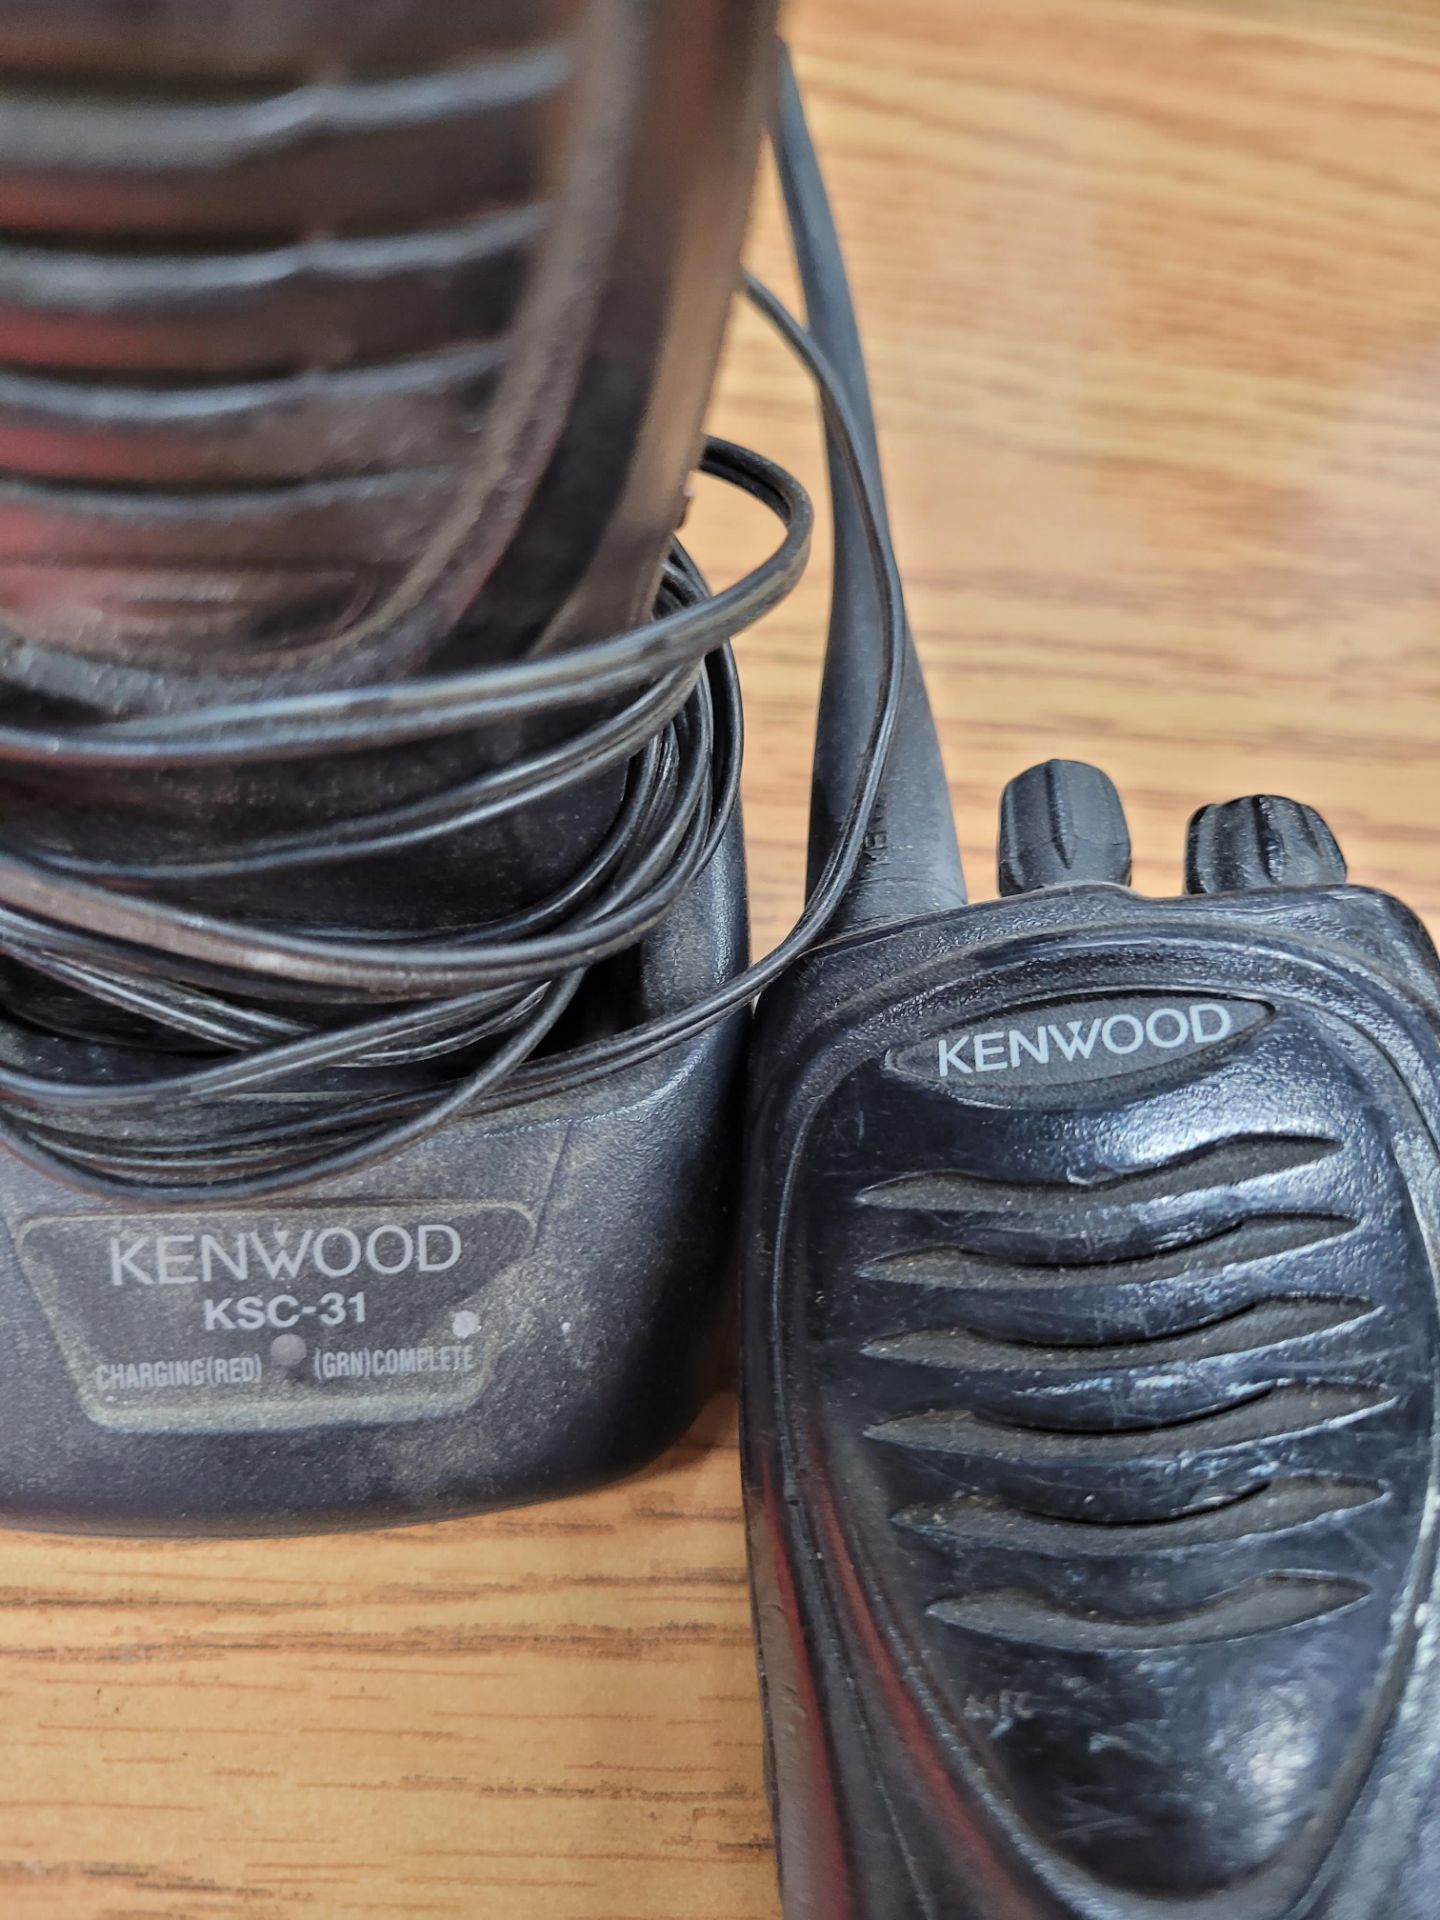 (2) KENWOOD KSC-31 two way radios and chargers - Image 3 of 3